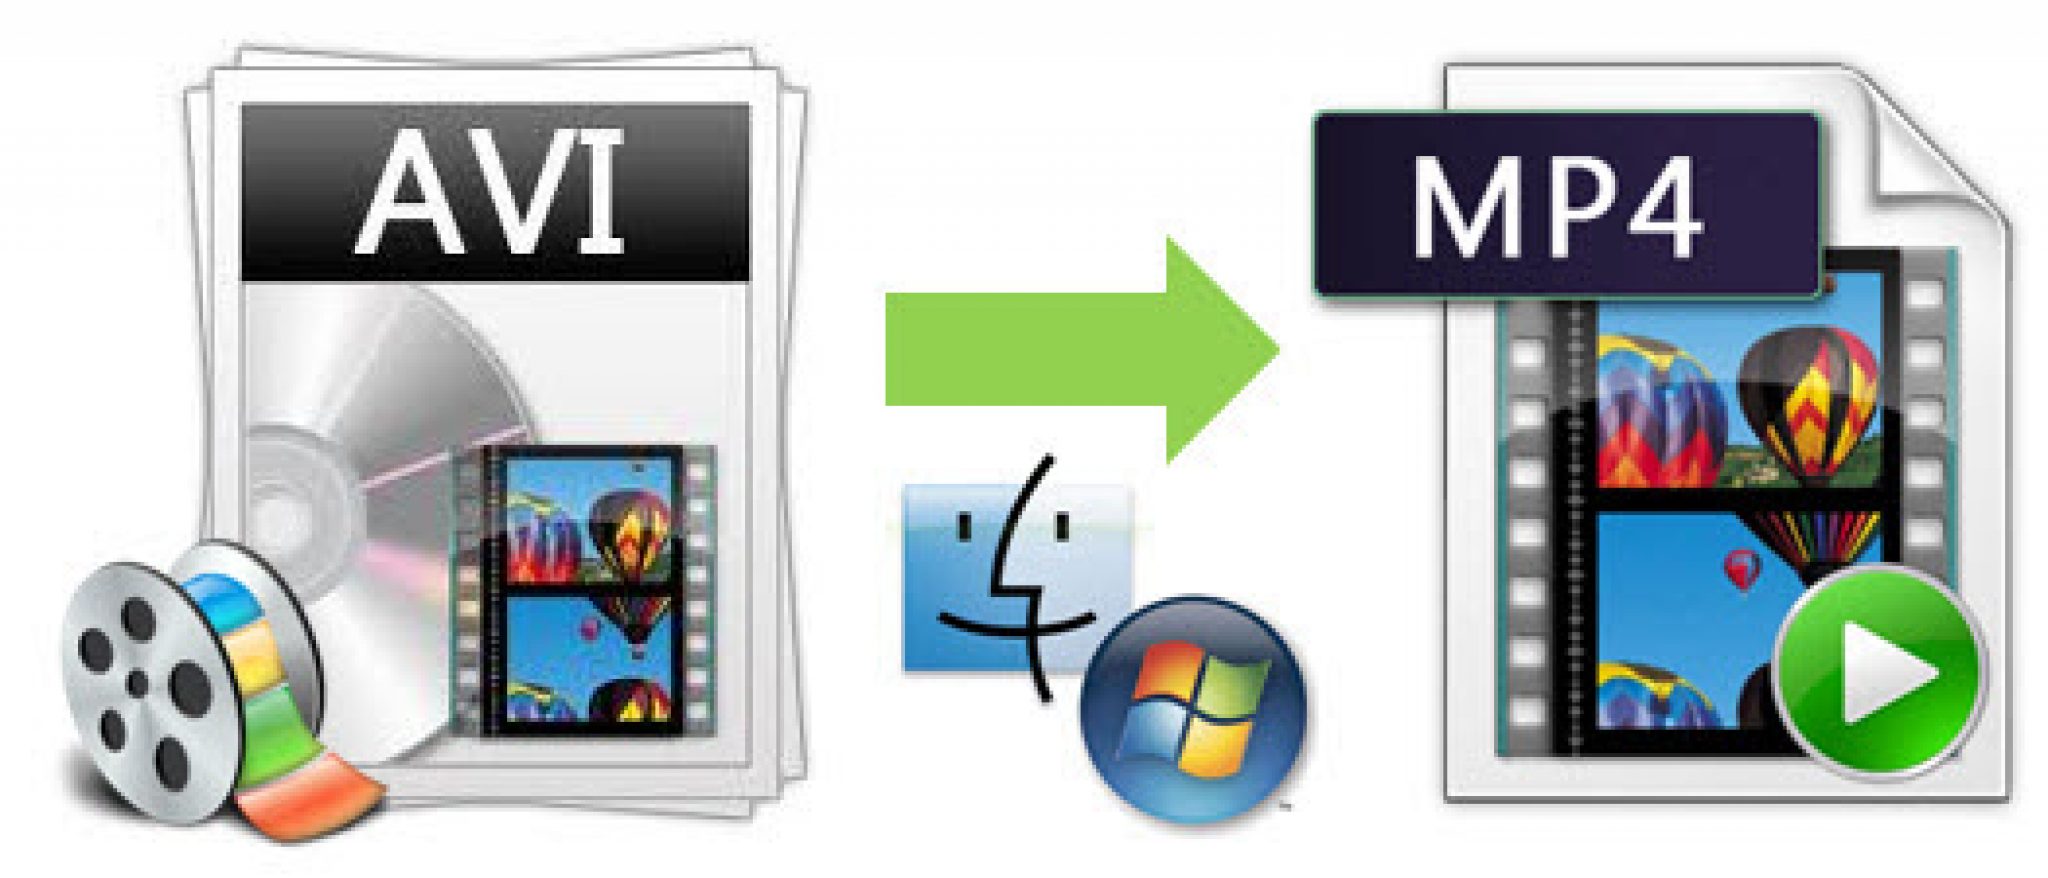 avi to mp4 video converter free download for mac